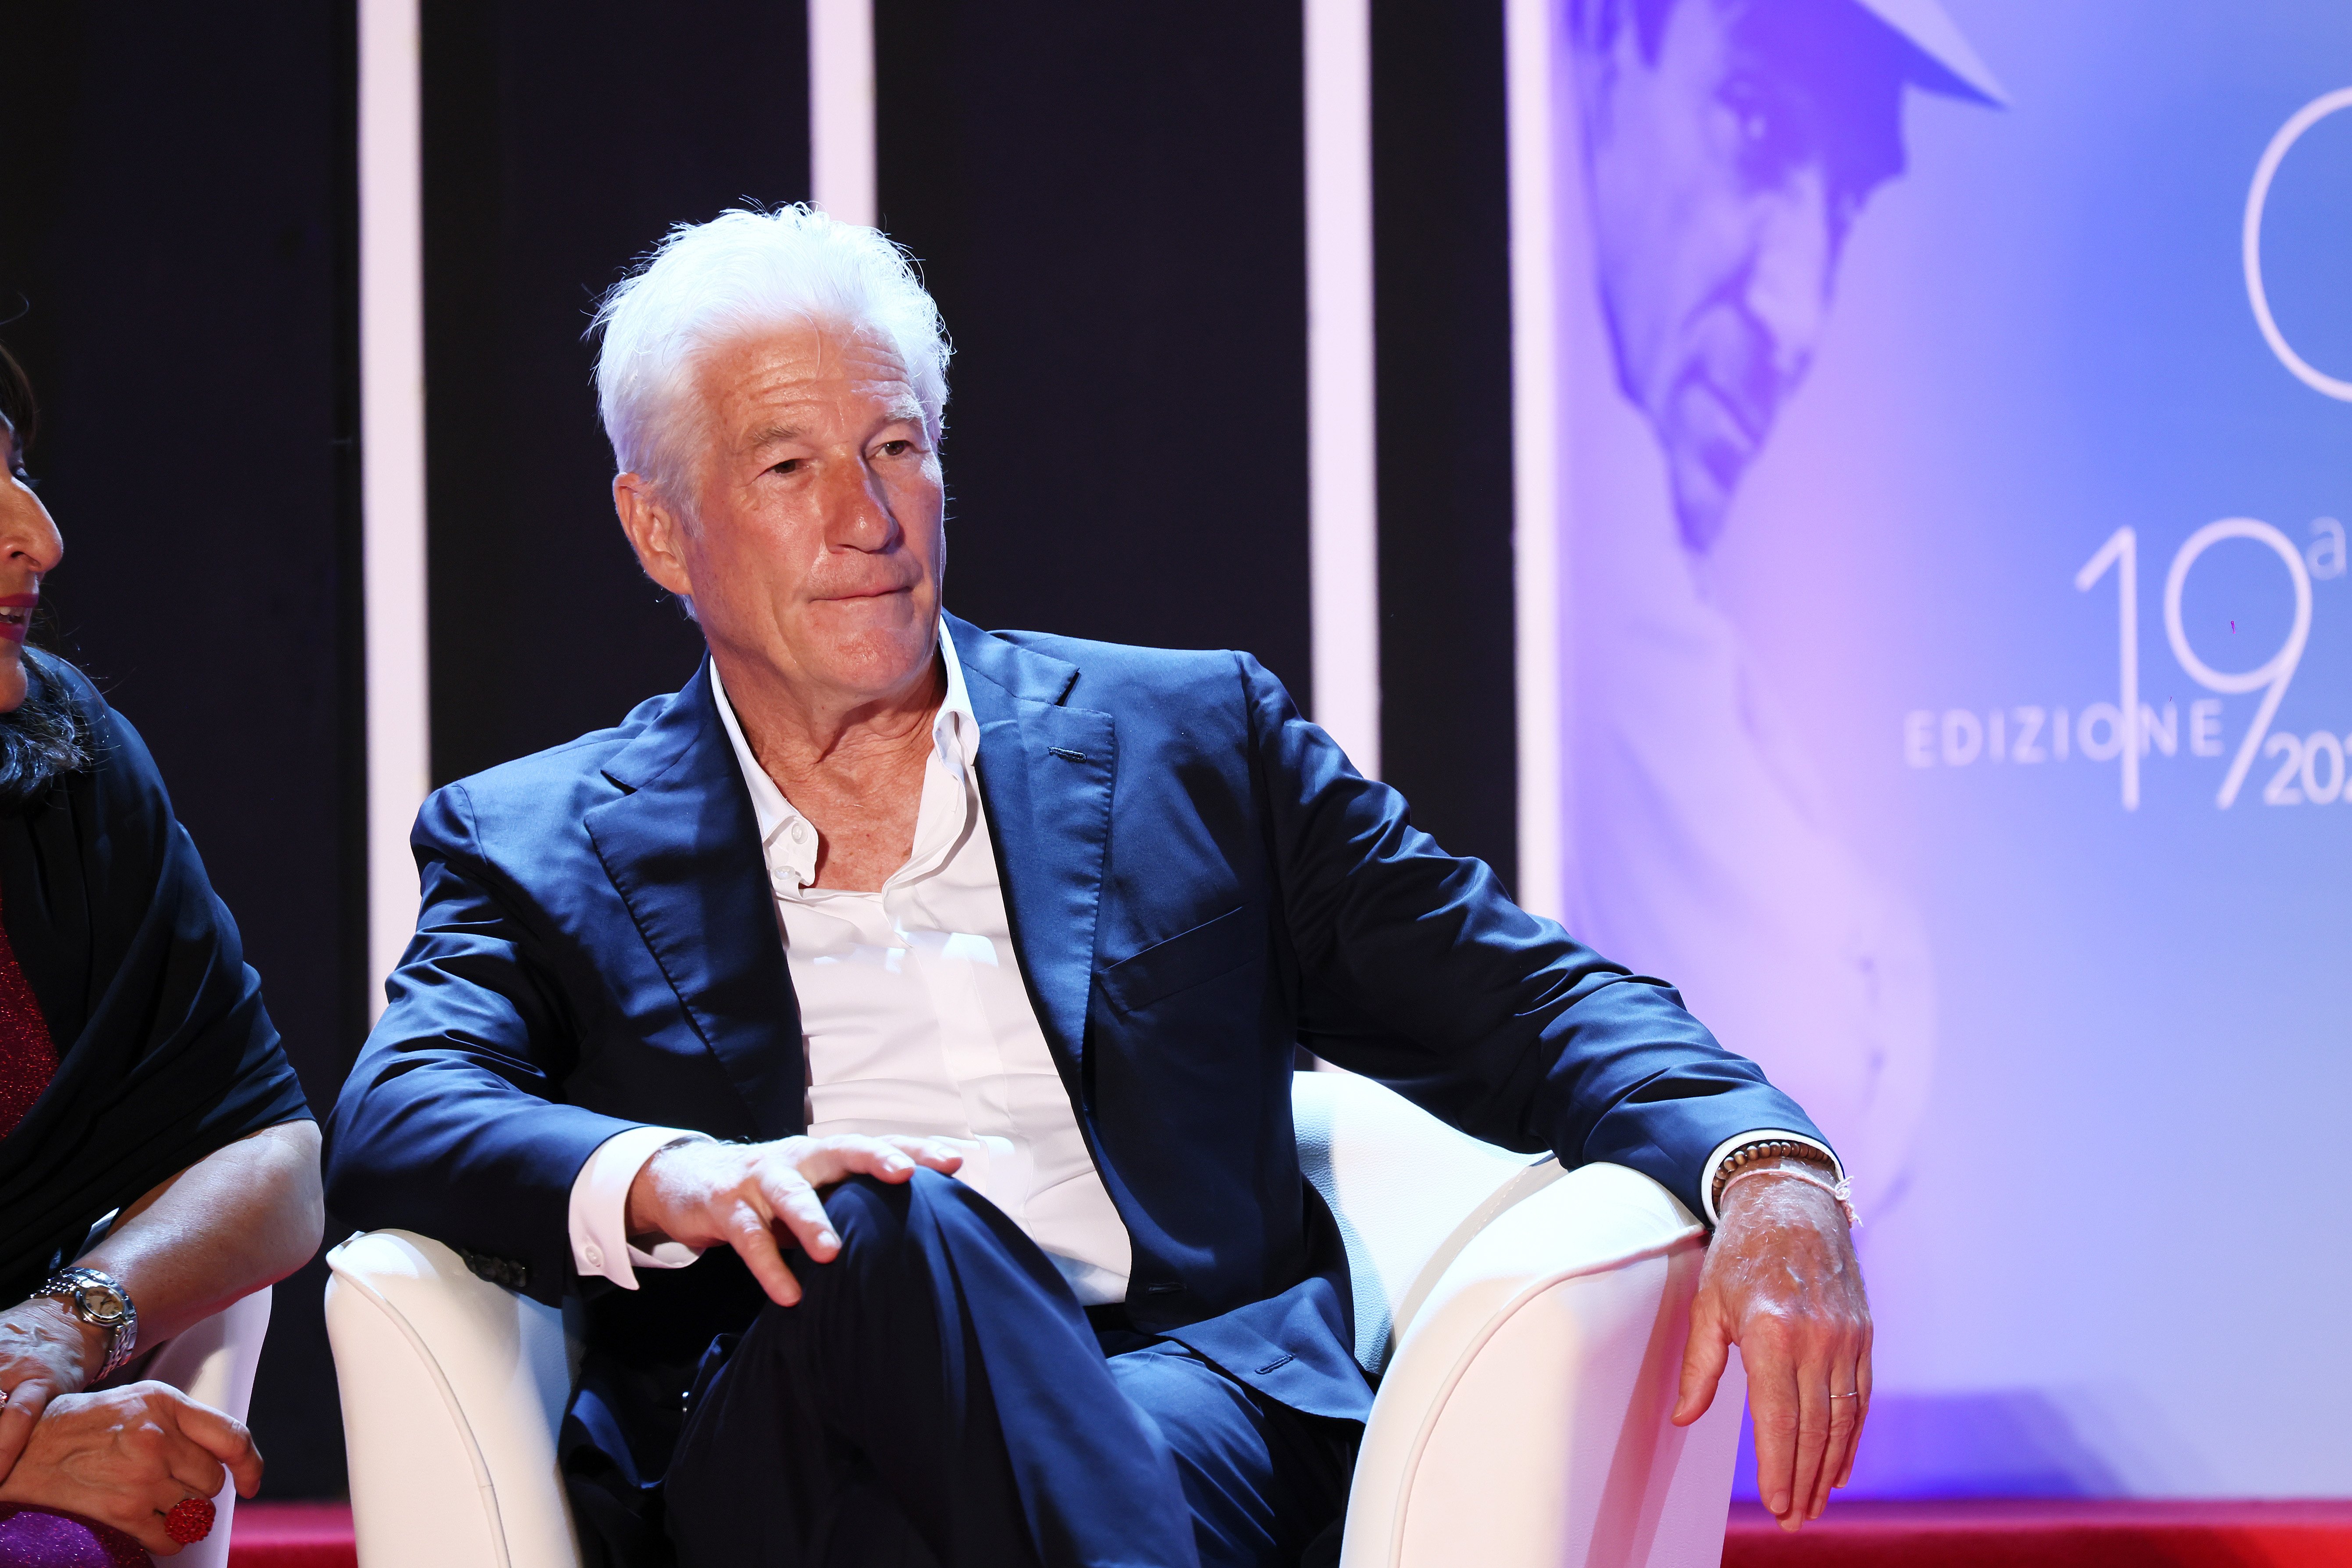 Richard Gere during the Magna Graecia Film Festival 2022 at Arena on August 05, 2022 in Catanzaro, Italy | Source: Getty Images 